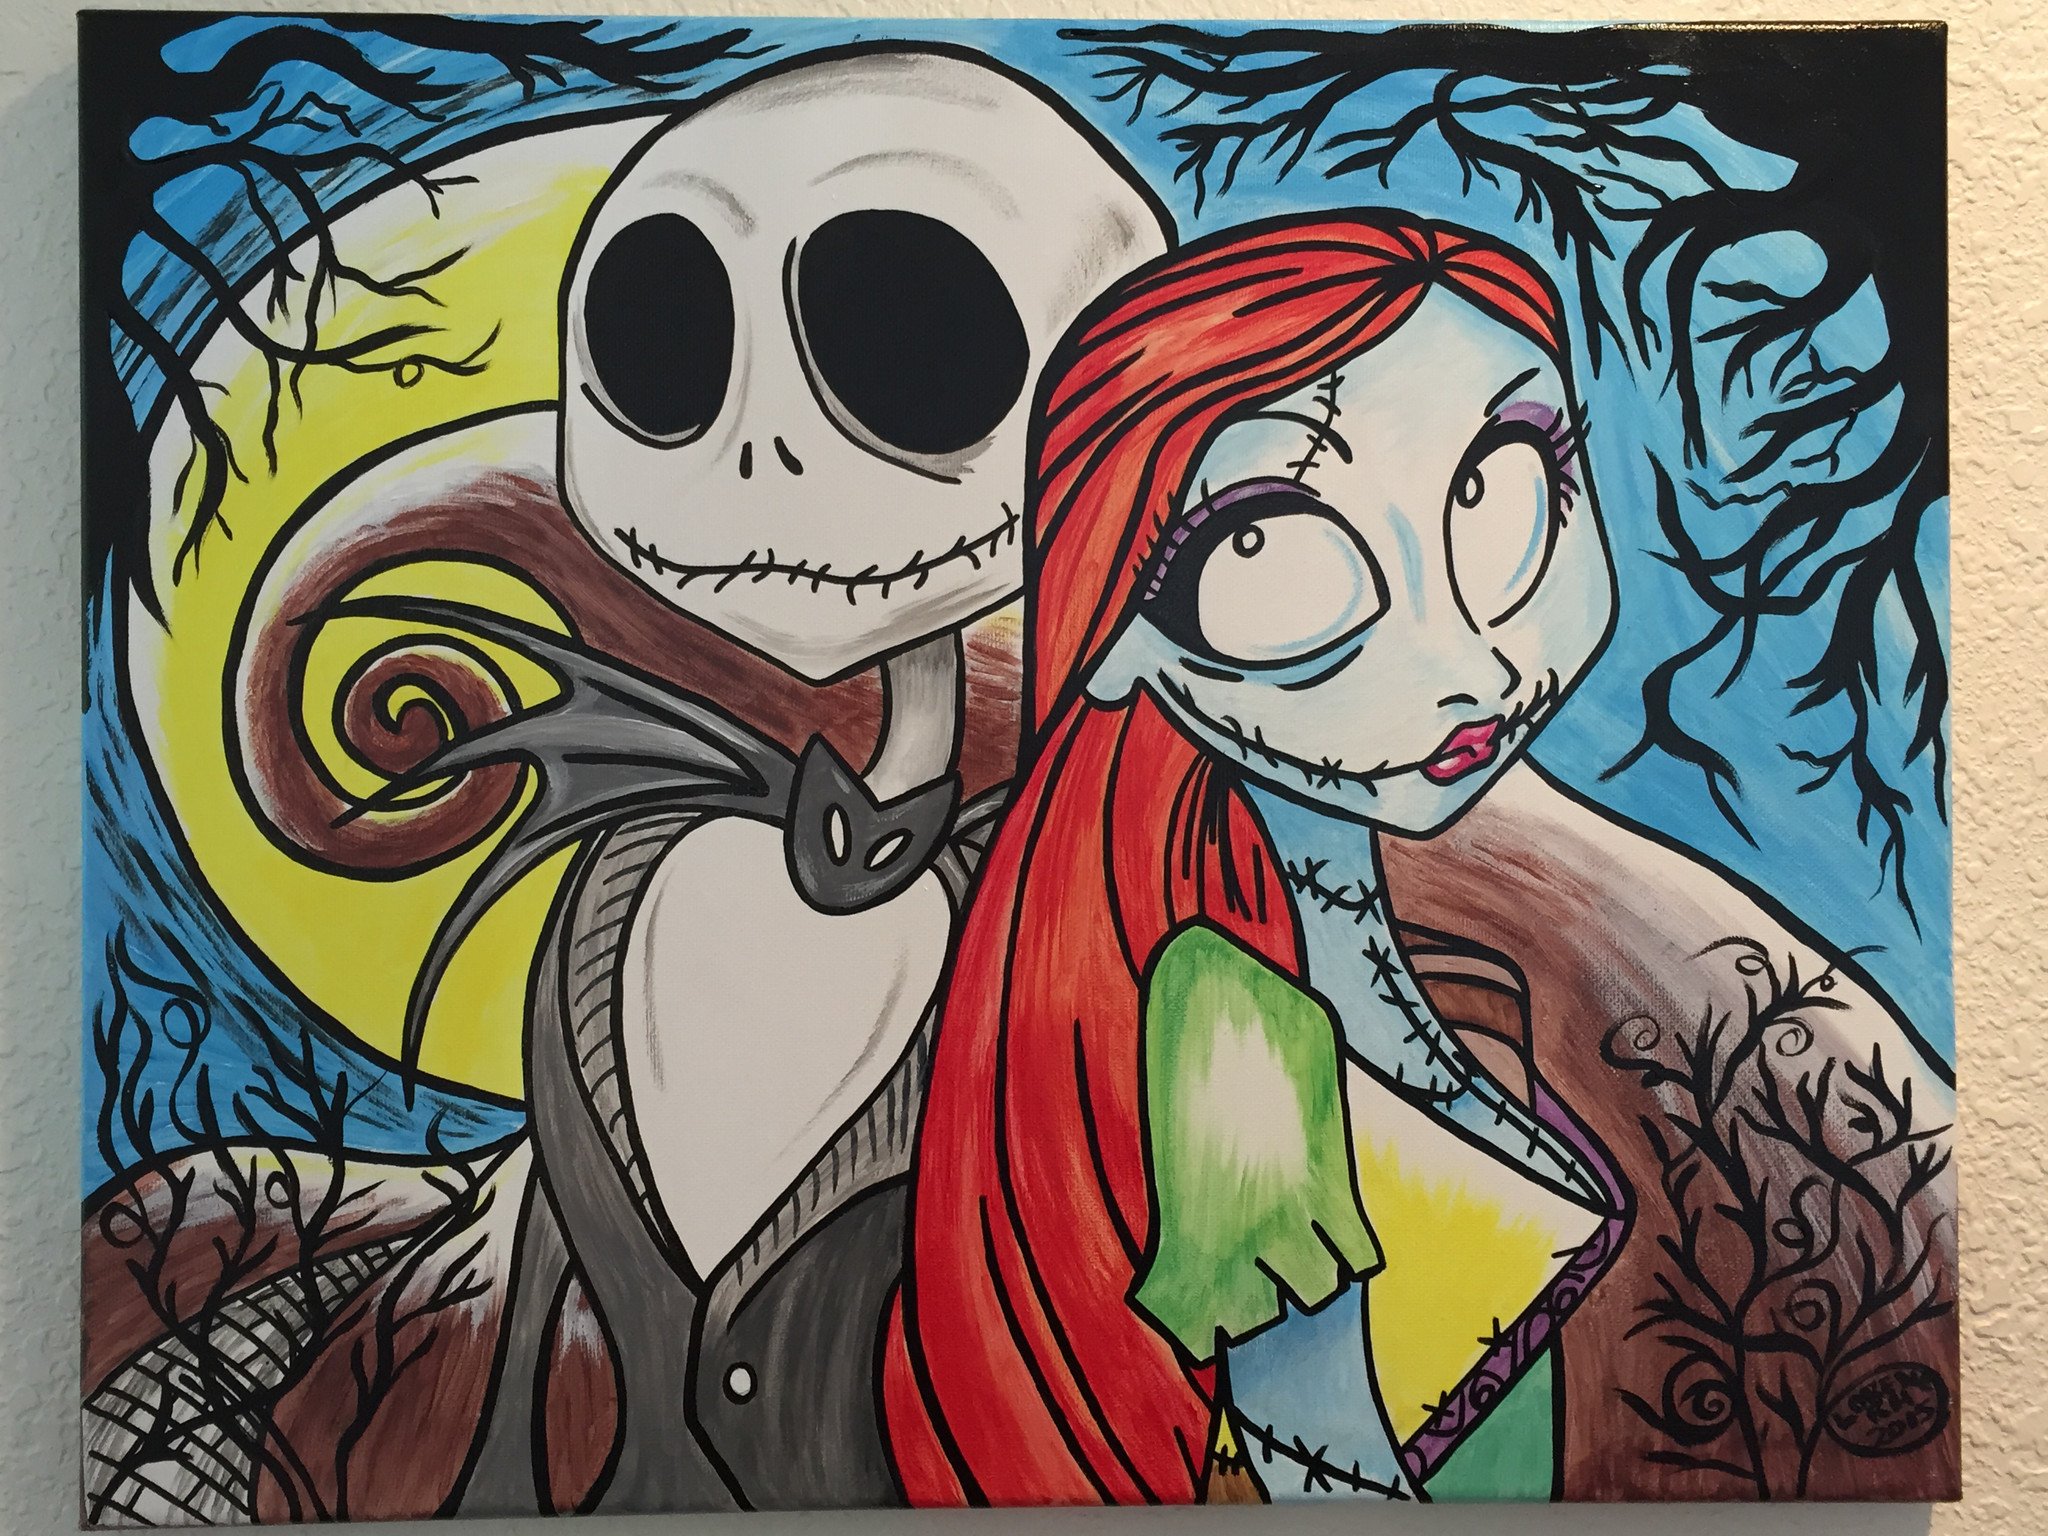 2048x1536 Jack And Sally Pin Possible Parties, Workshops Amp Artwork - Jack ...